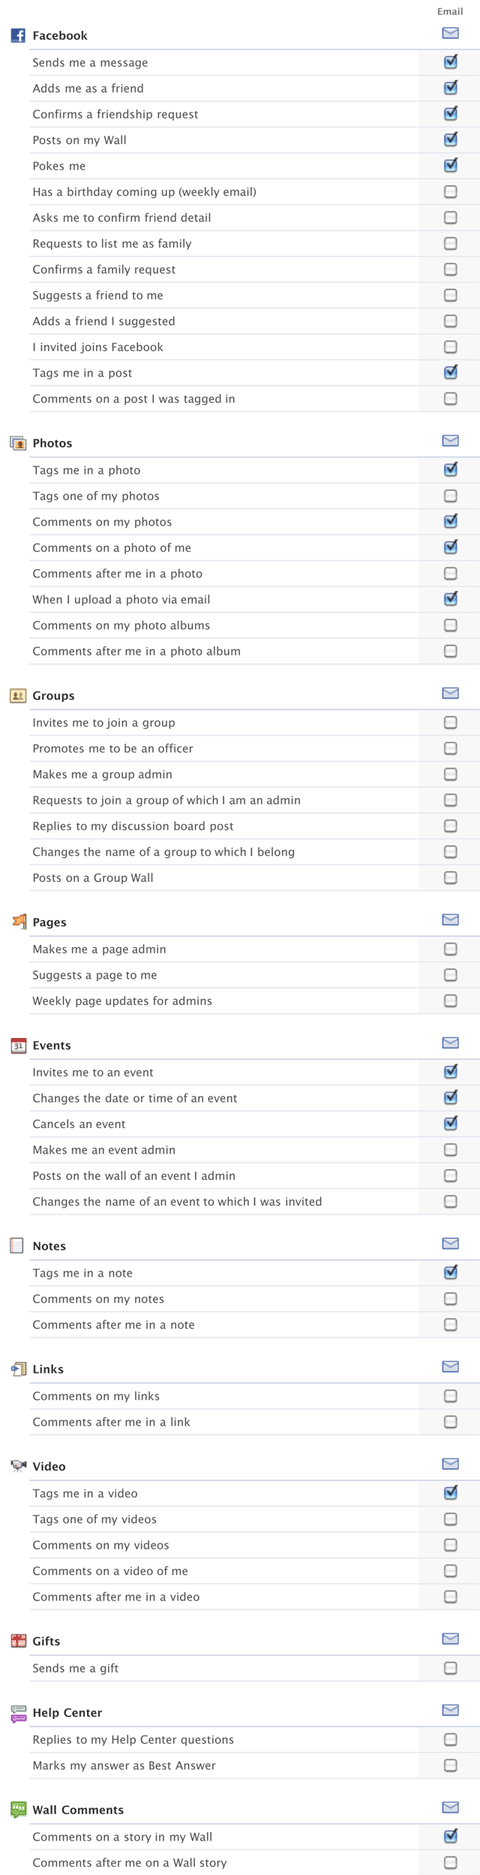 Recommended settings for notifications when using “Facebook for BlackBerry.”